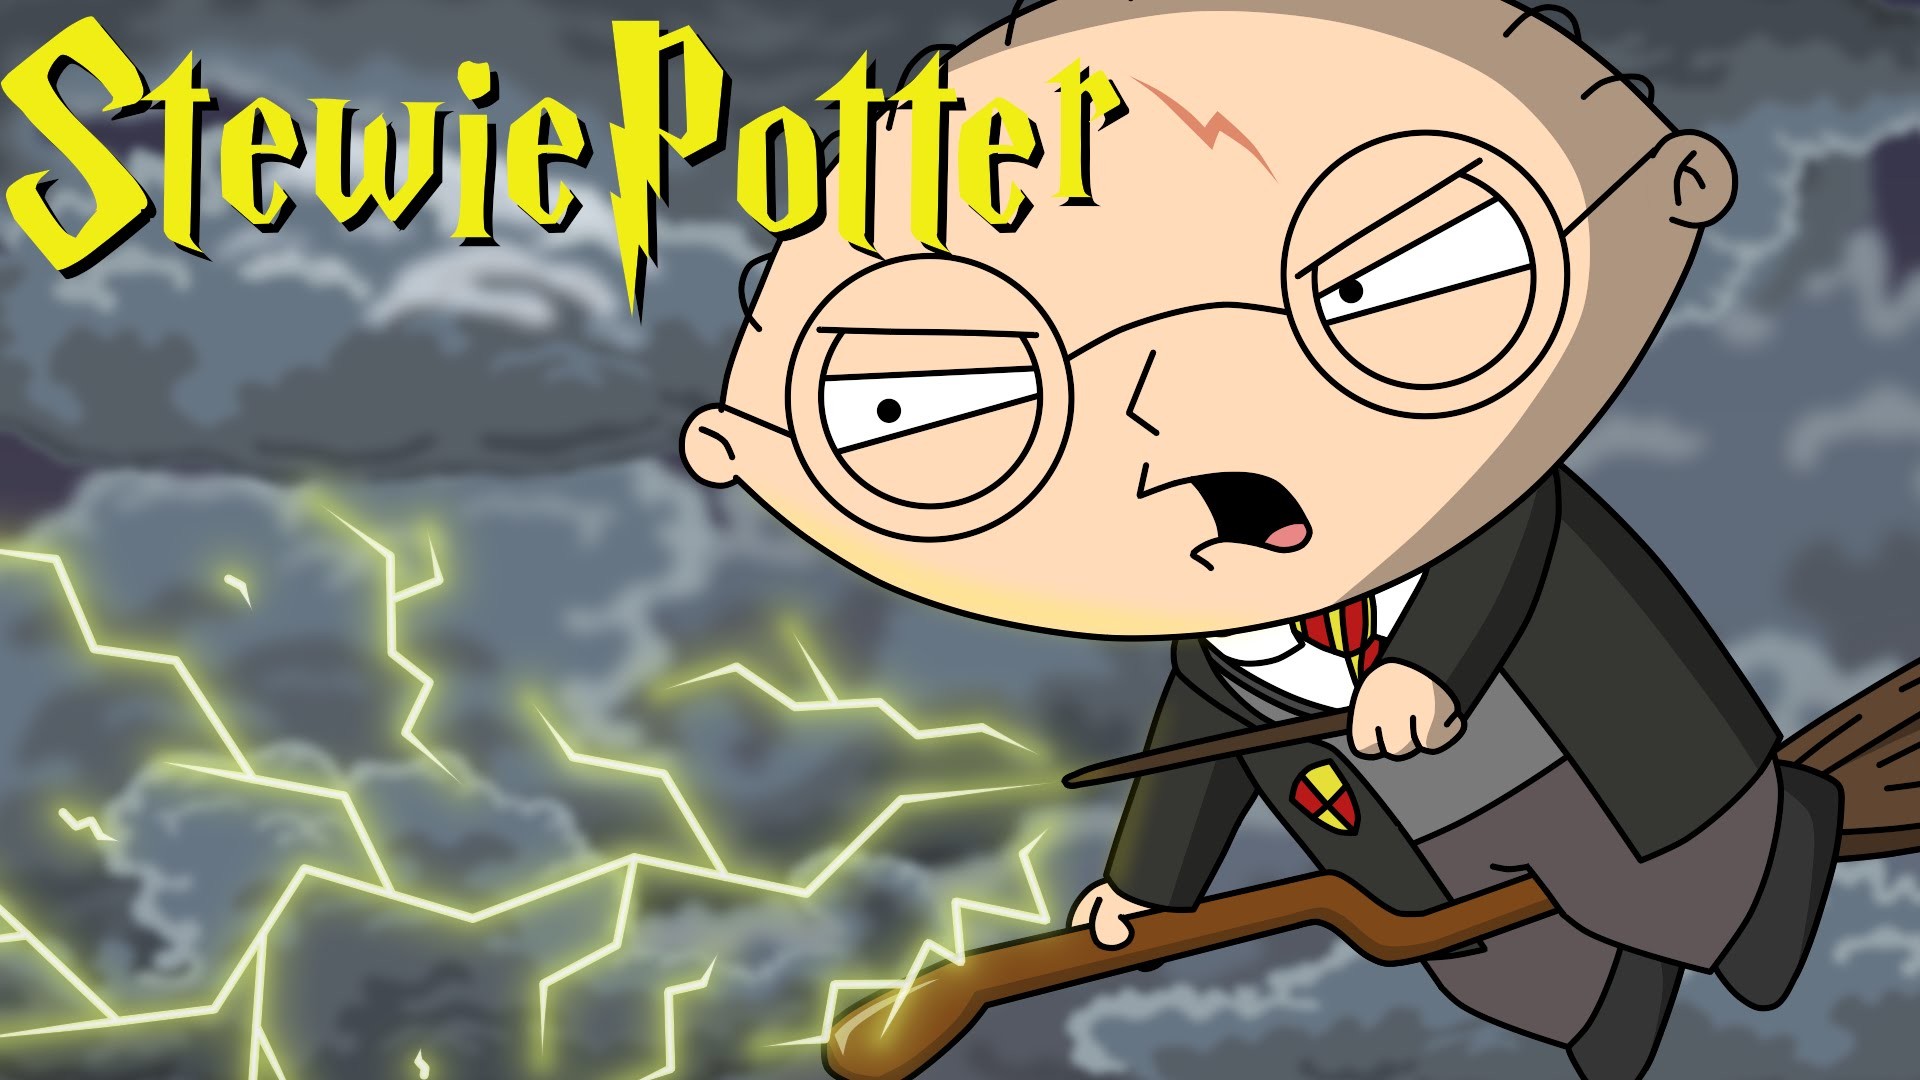 1920x1080 Stewie Potter, A Magical Animated Parody of Family Guy and Harry Potter